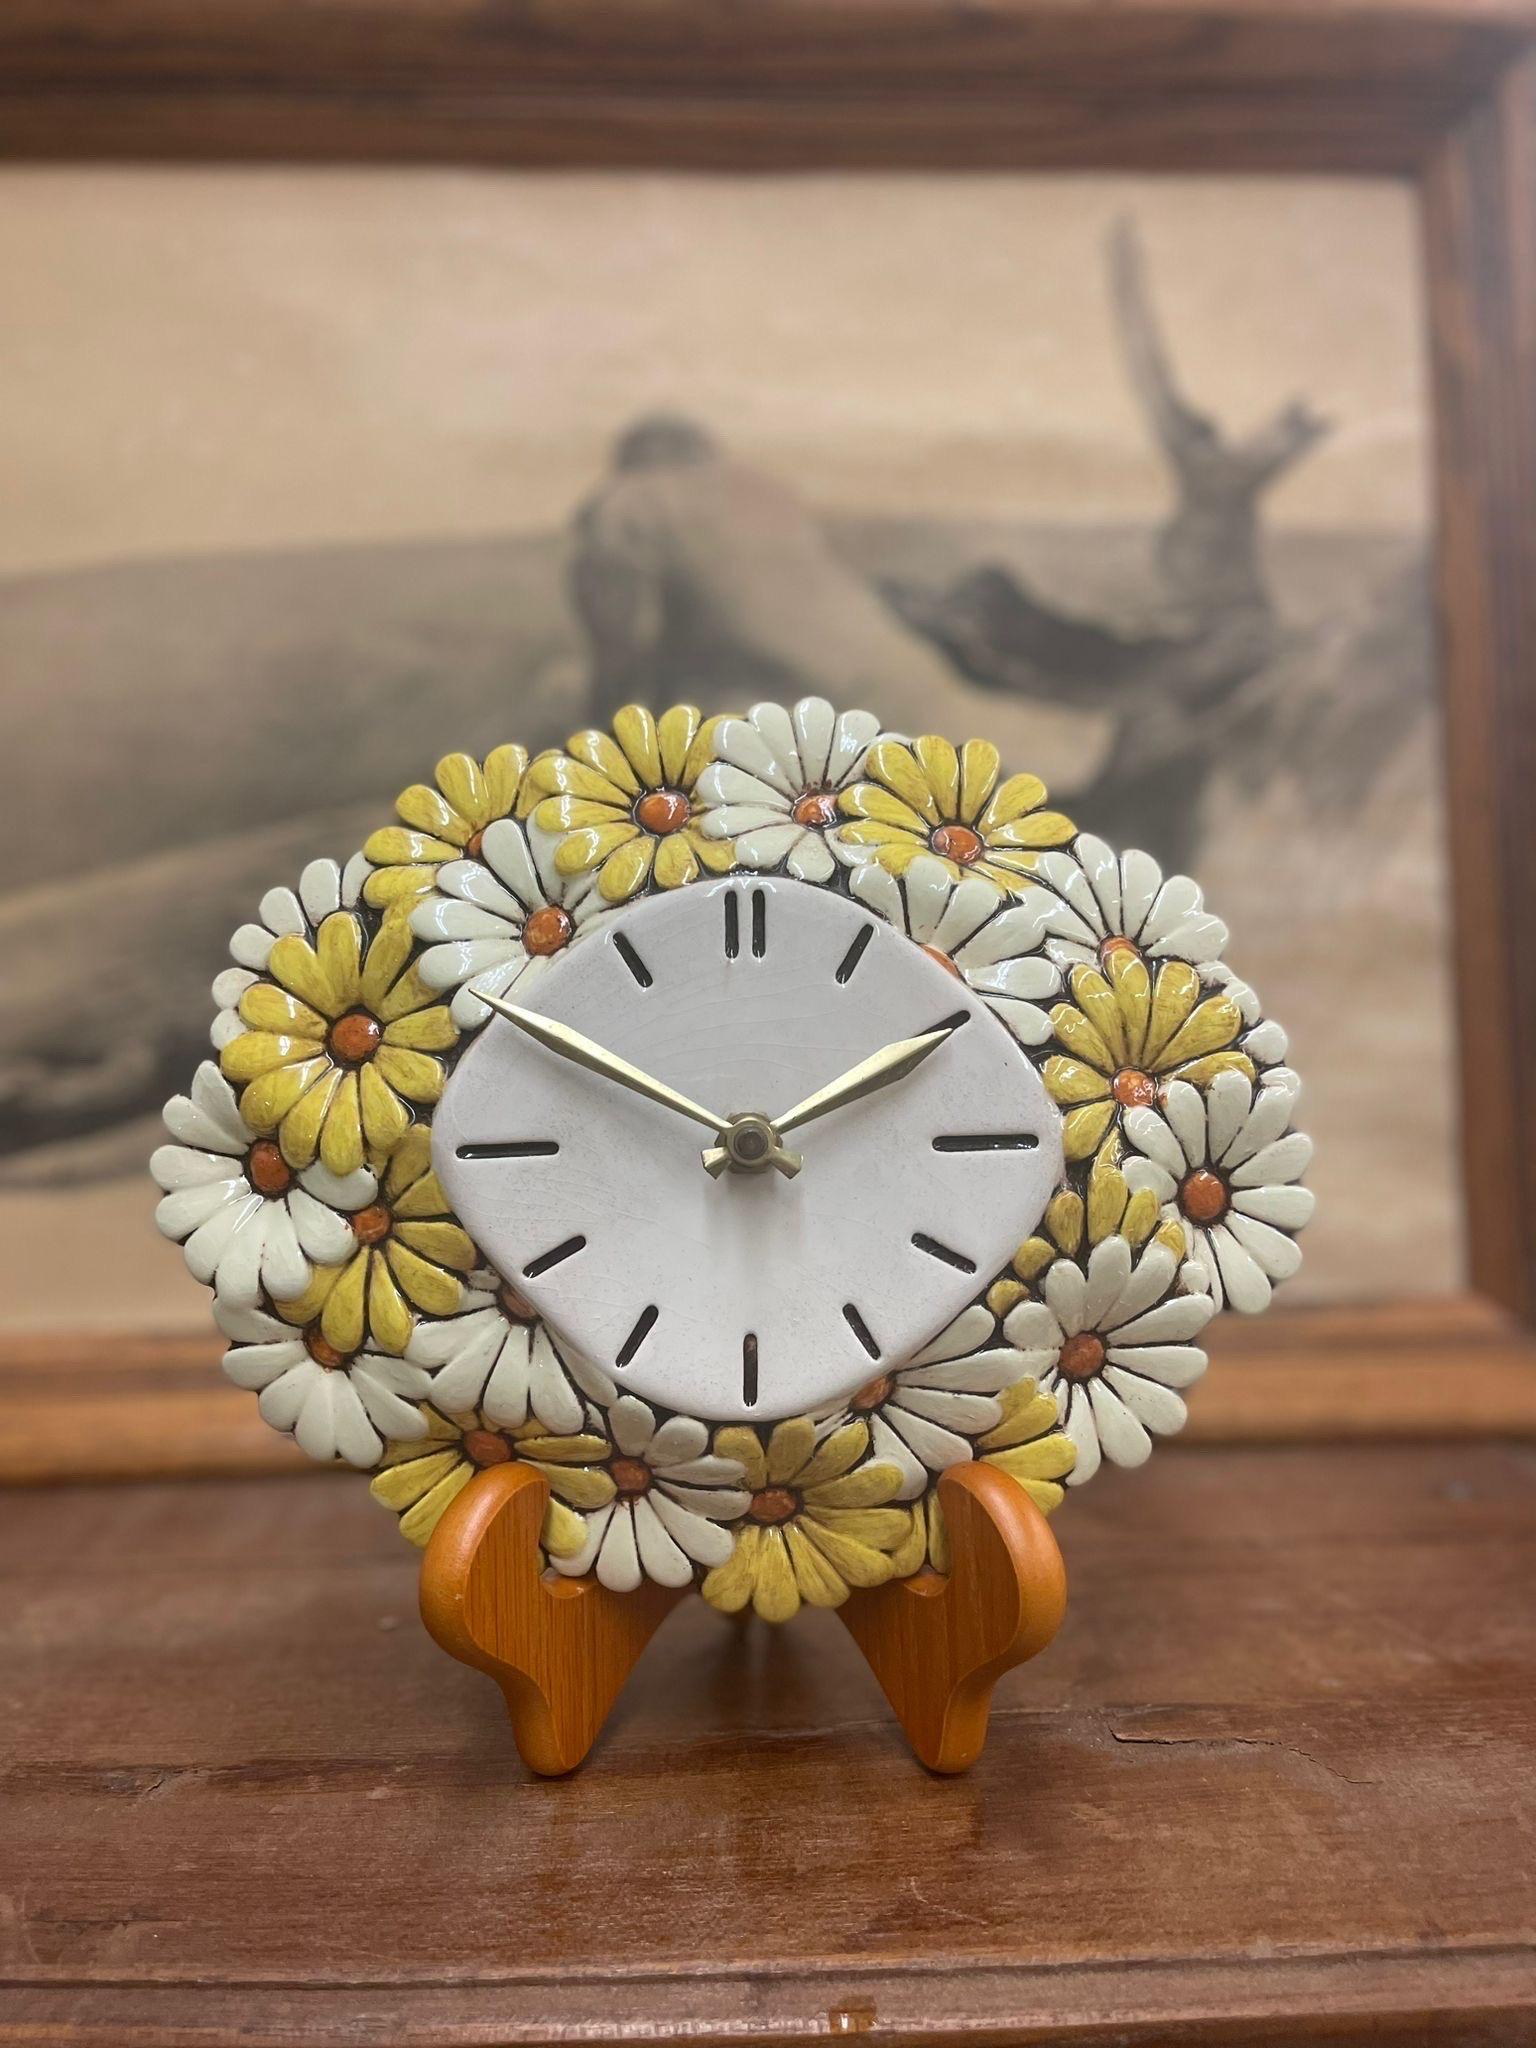 Wall Clock with Daisy Border. Stand Not Included. Operational Ability Unknown. Makers Mark on the back.

Dimensions. 10 W ; 3 D ; 8 H